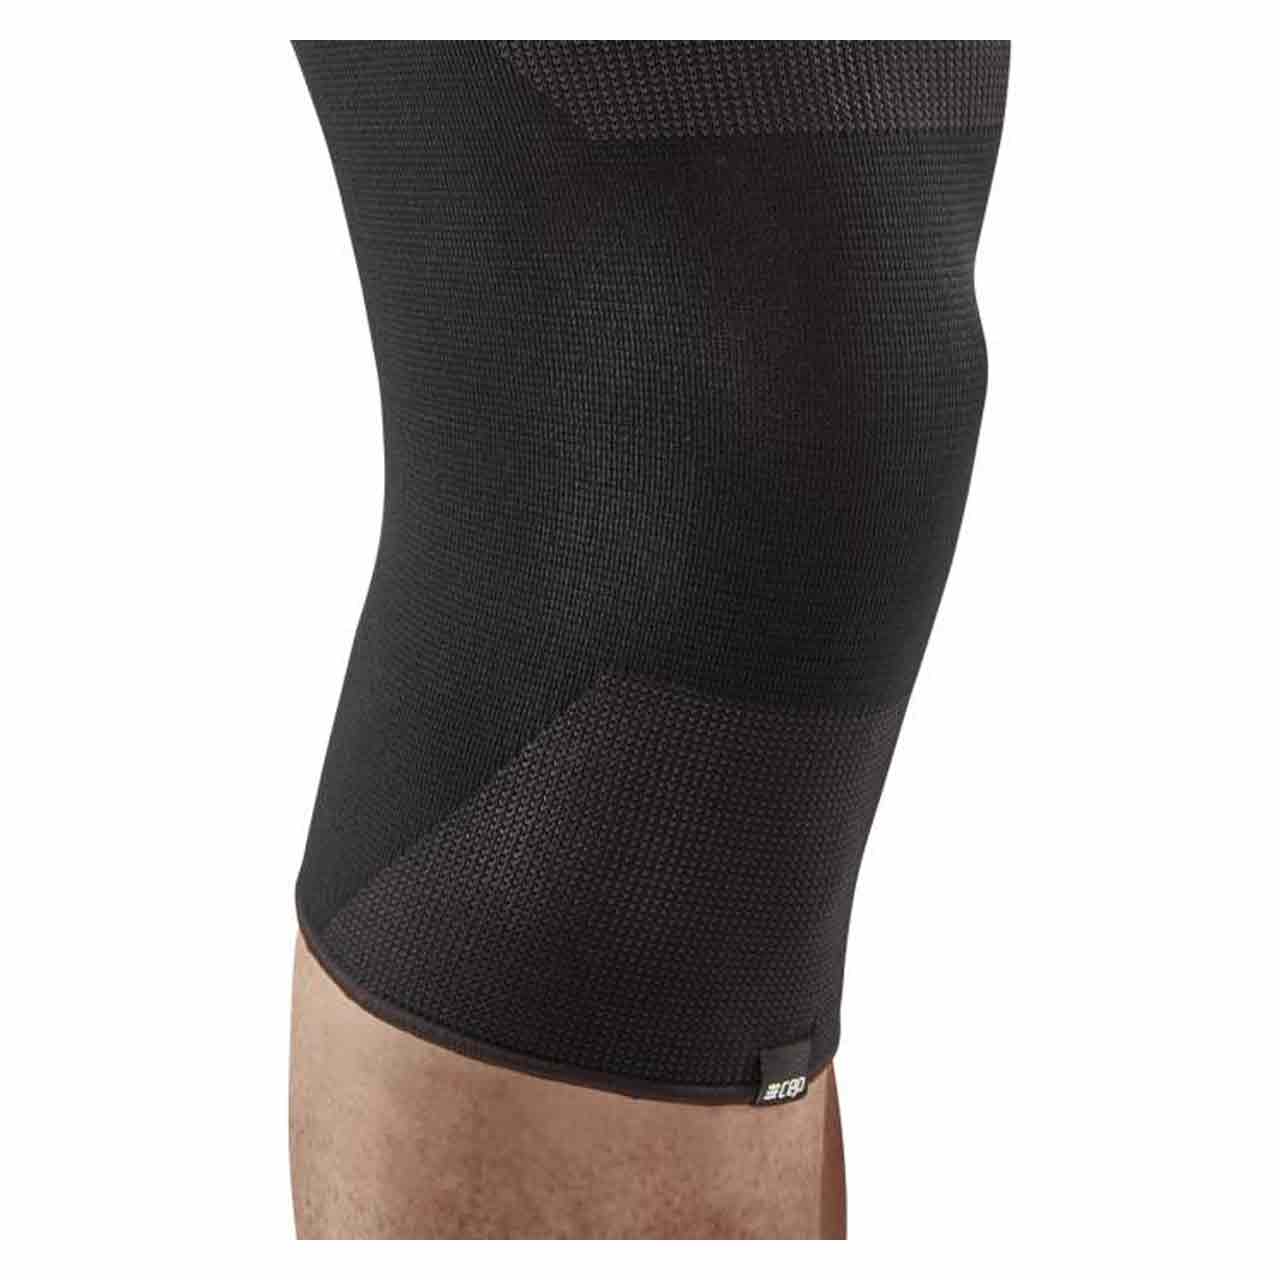 Knie Bandage mid support